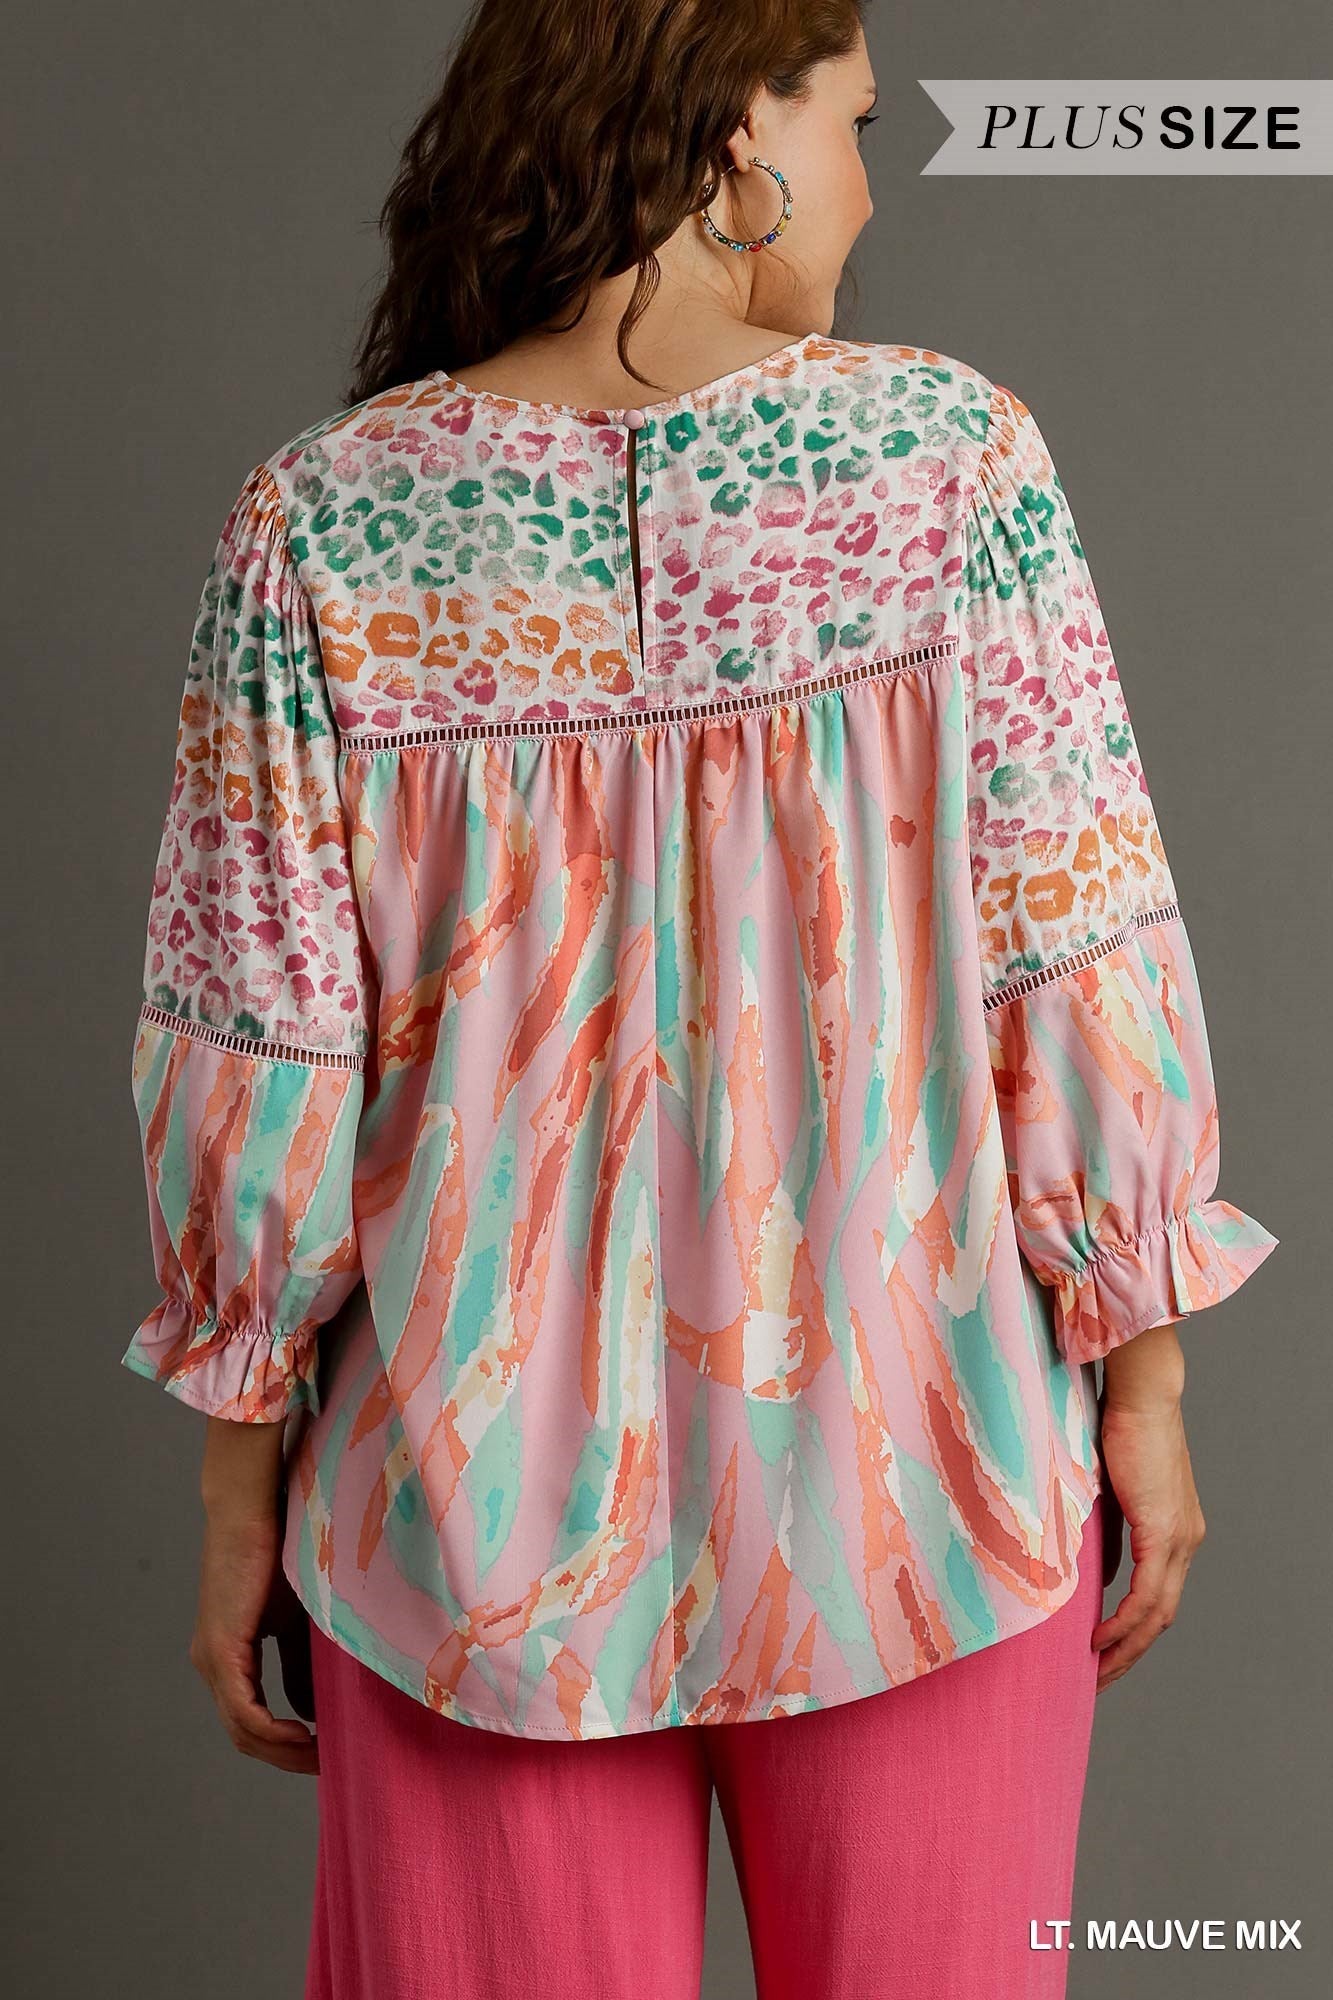 Mixed Print Top with 3/4 Sleeves and Lace Trim. Features Open Split Back Details with Button Closure